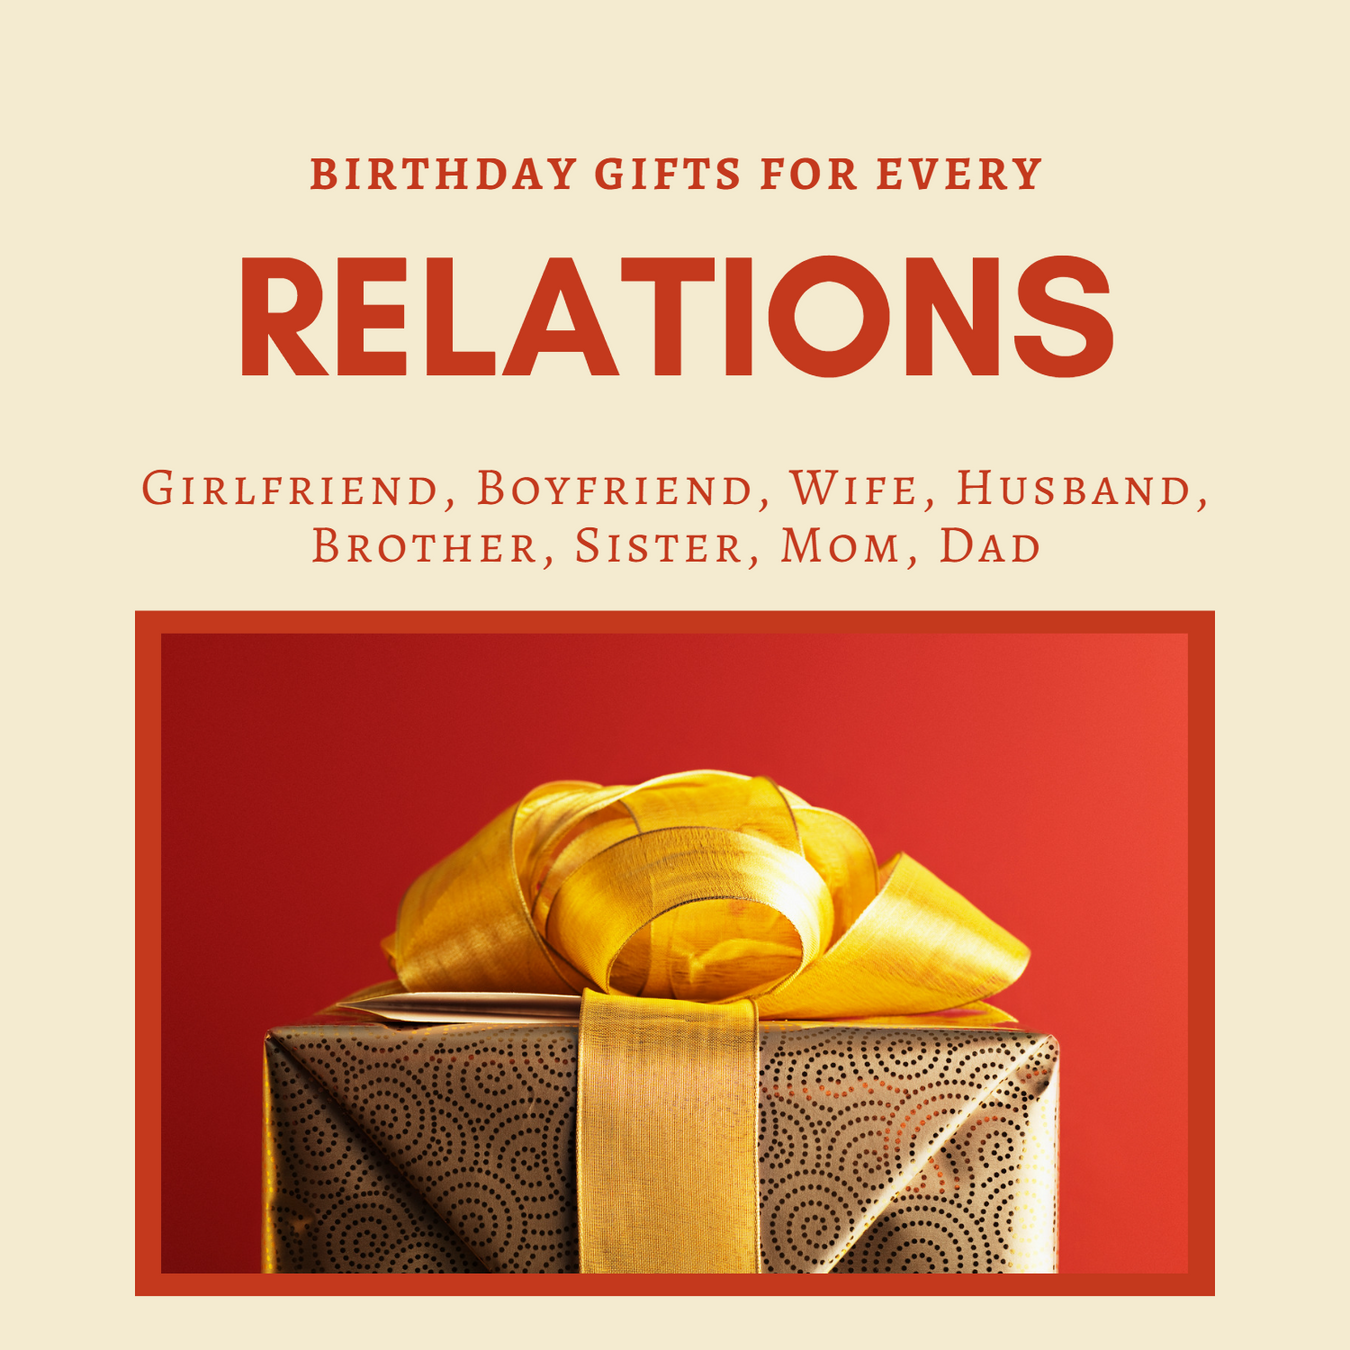 Shop birthday gifts for every relation at Dudus Online